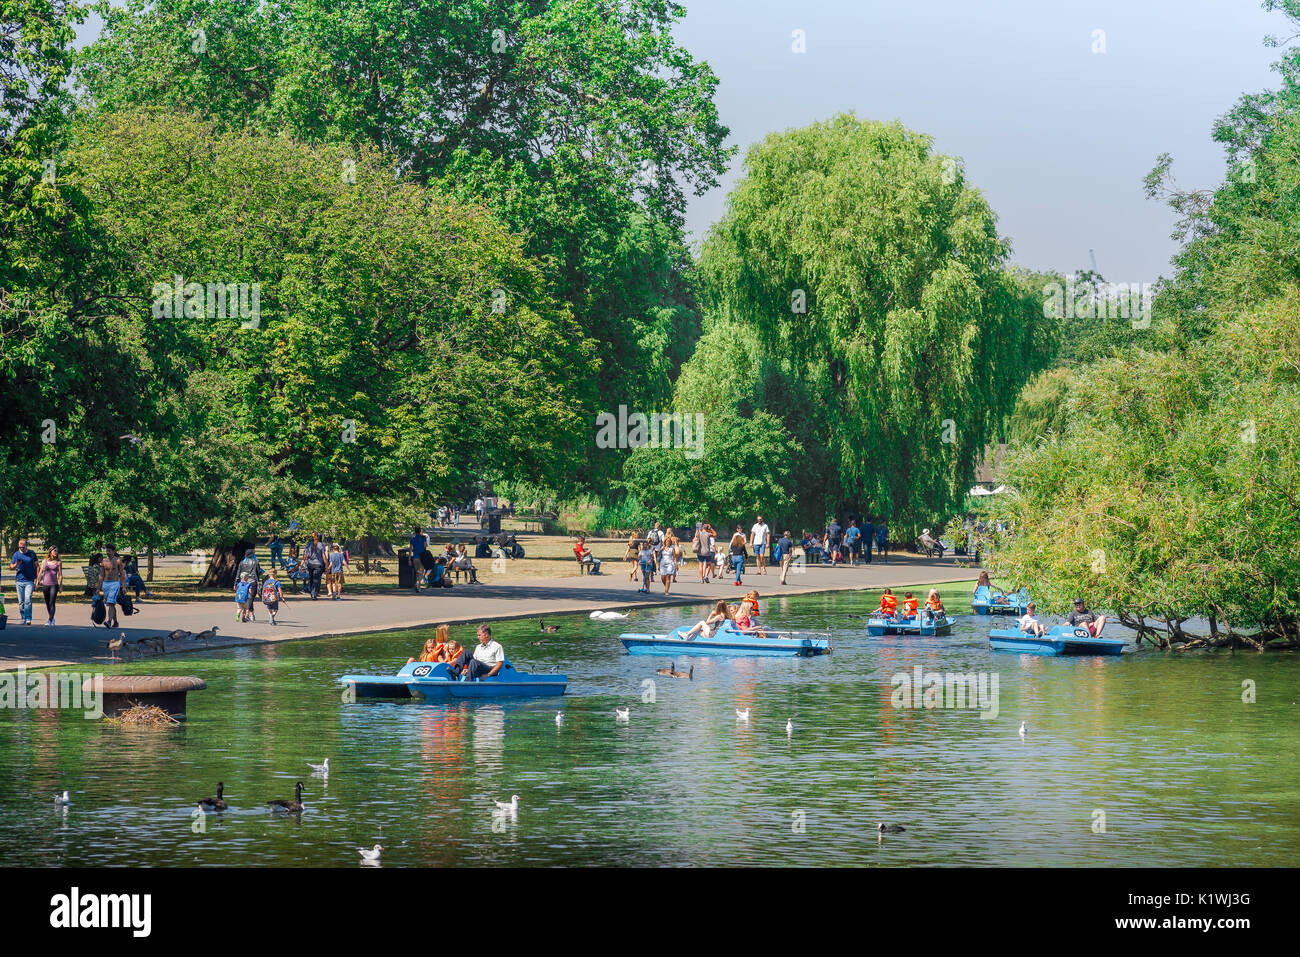 London tourism summer, view of tourists in pedalos enjoying a summer afternoon on the lake in Regent's Park, London, UK. Stock Photo